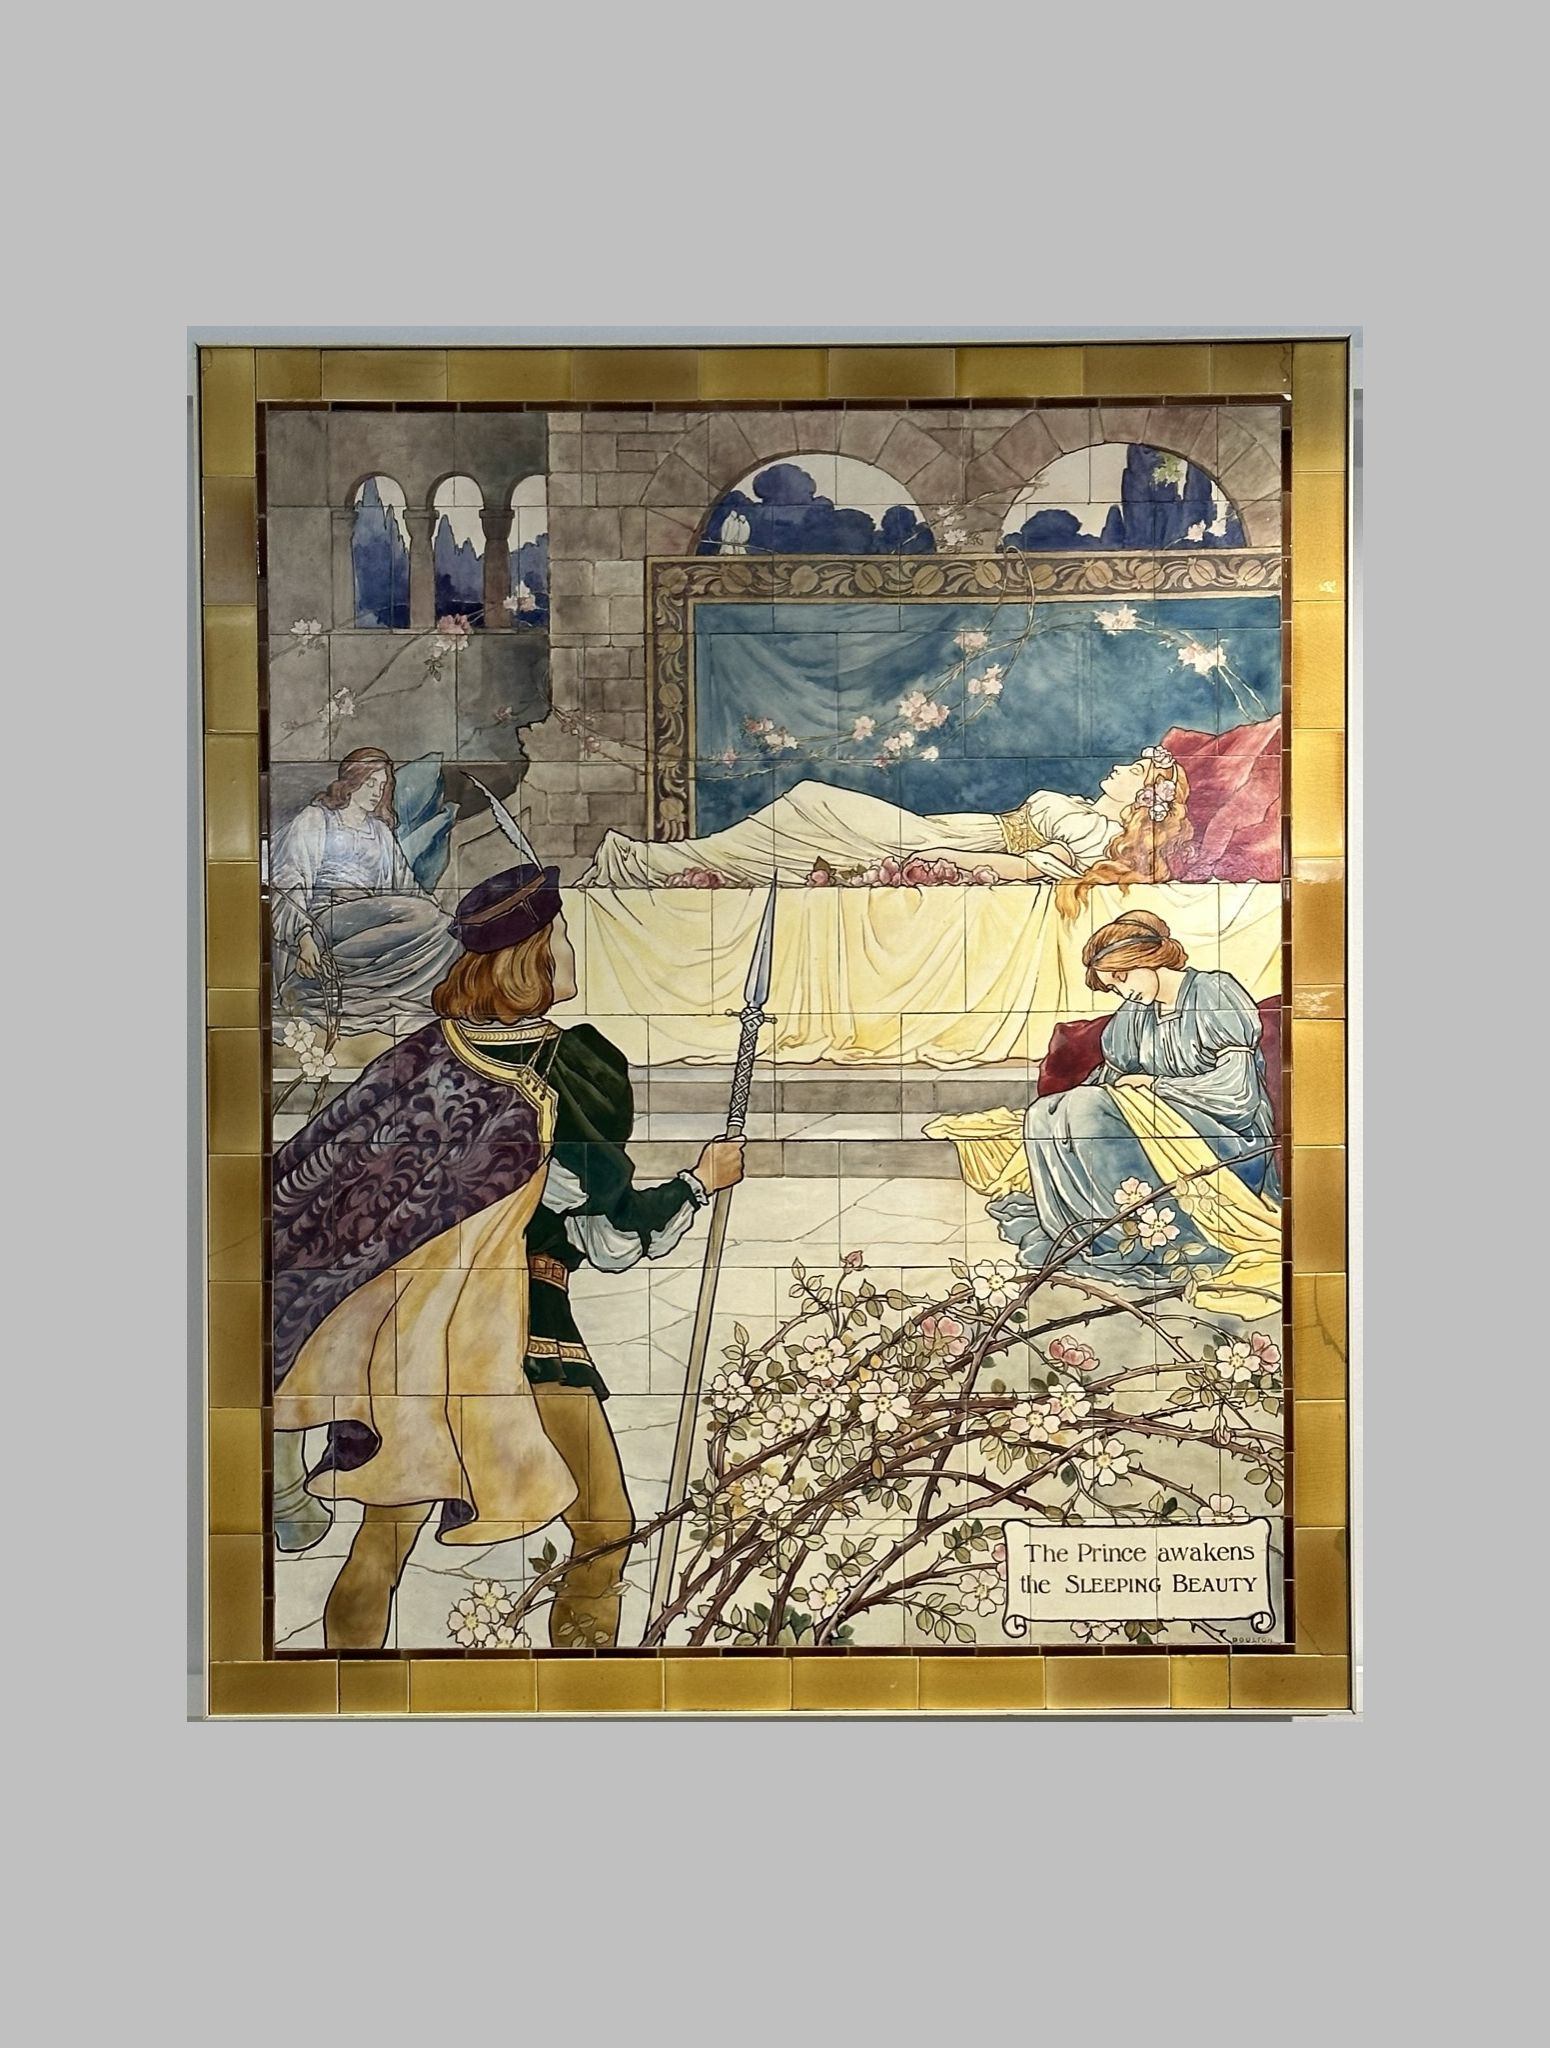 Sleeping Beauty scene painted on Doulton tiles (commissioned around 1900) from the Evelina Children's Hospital displayed in the long corridor at St Thomas' hospital.